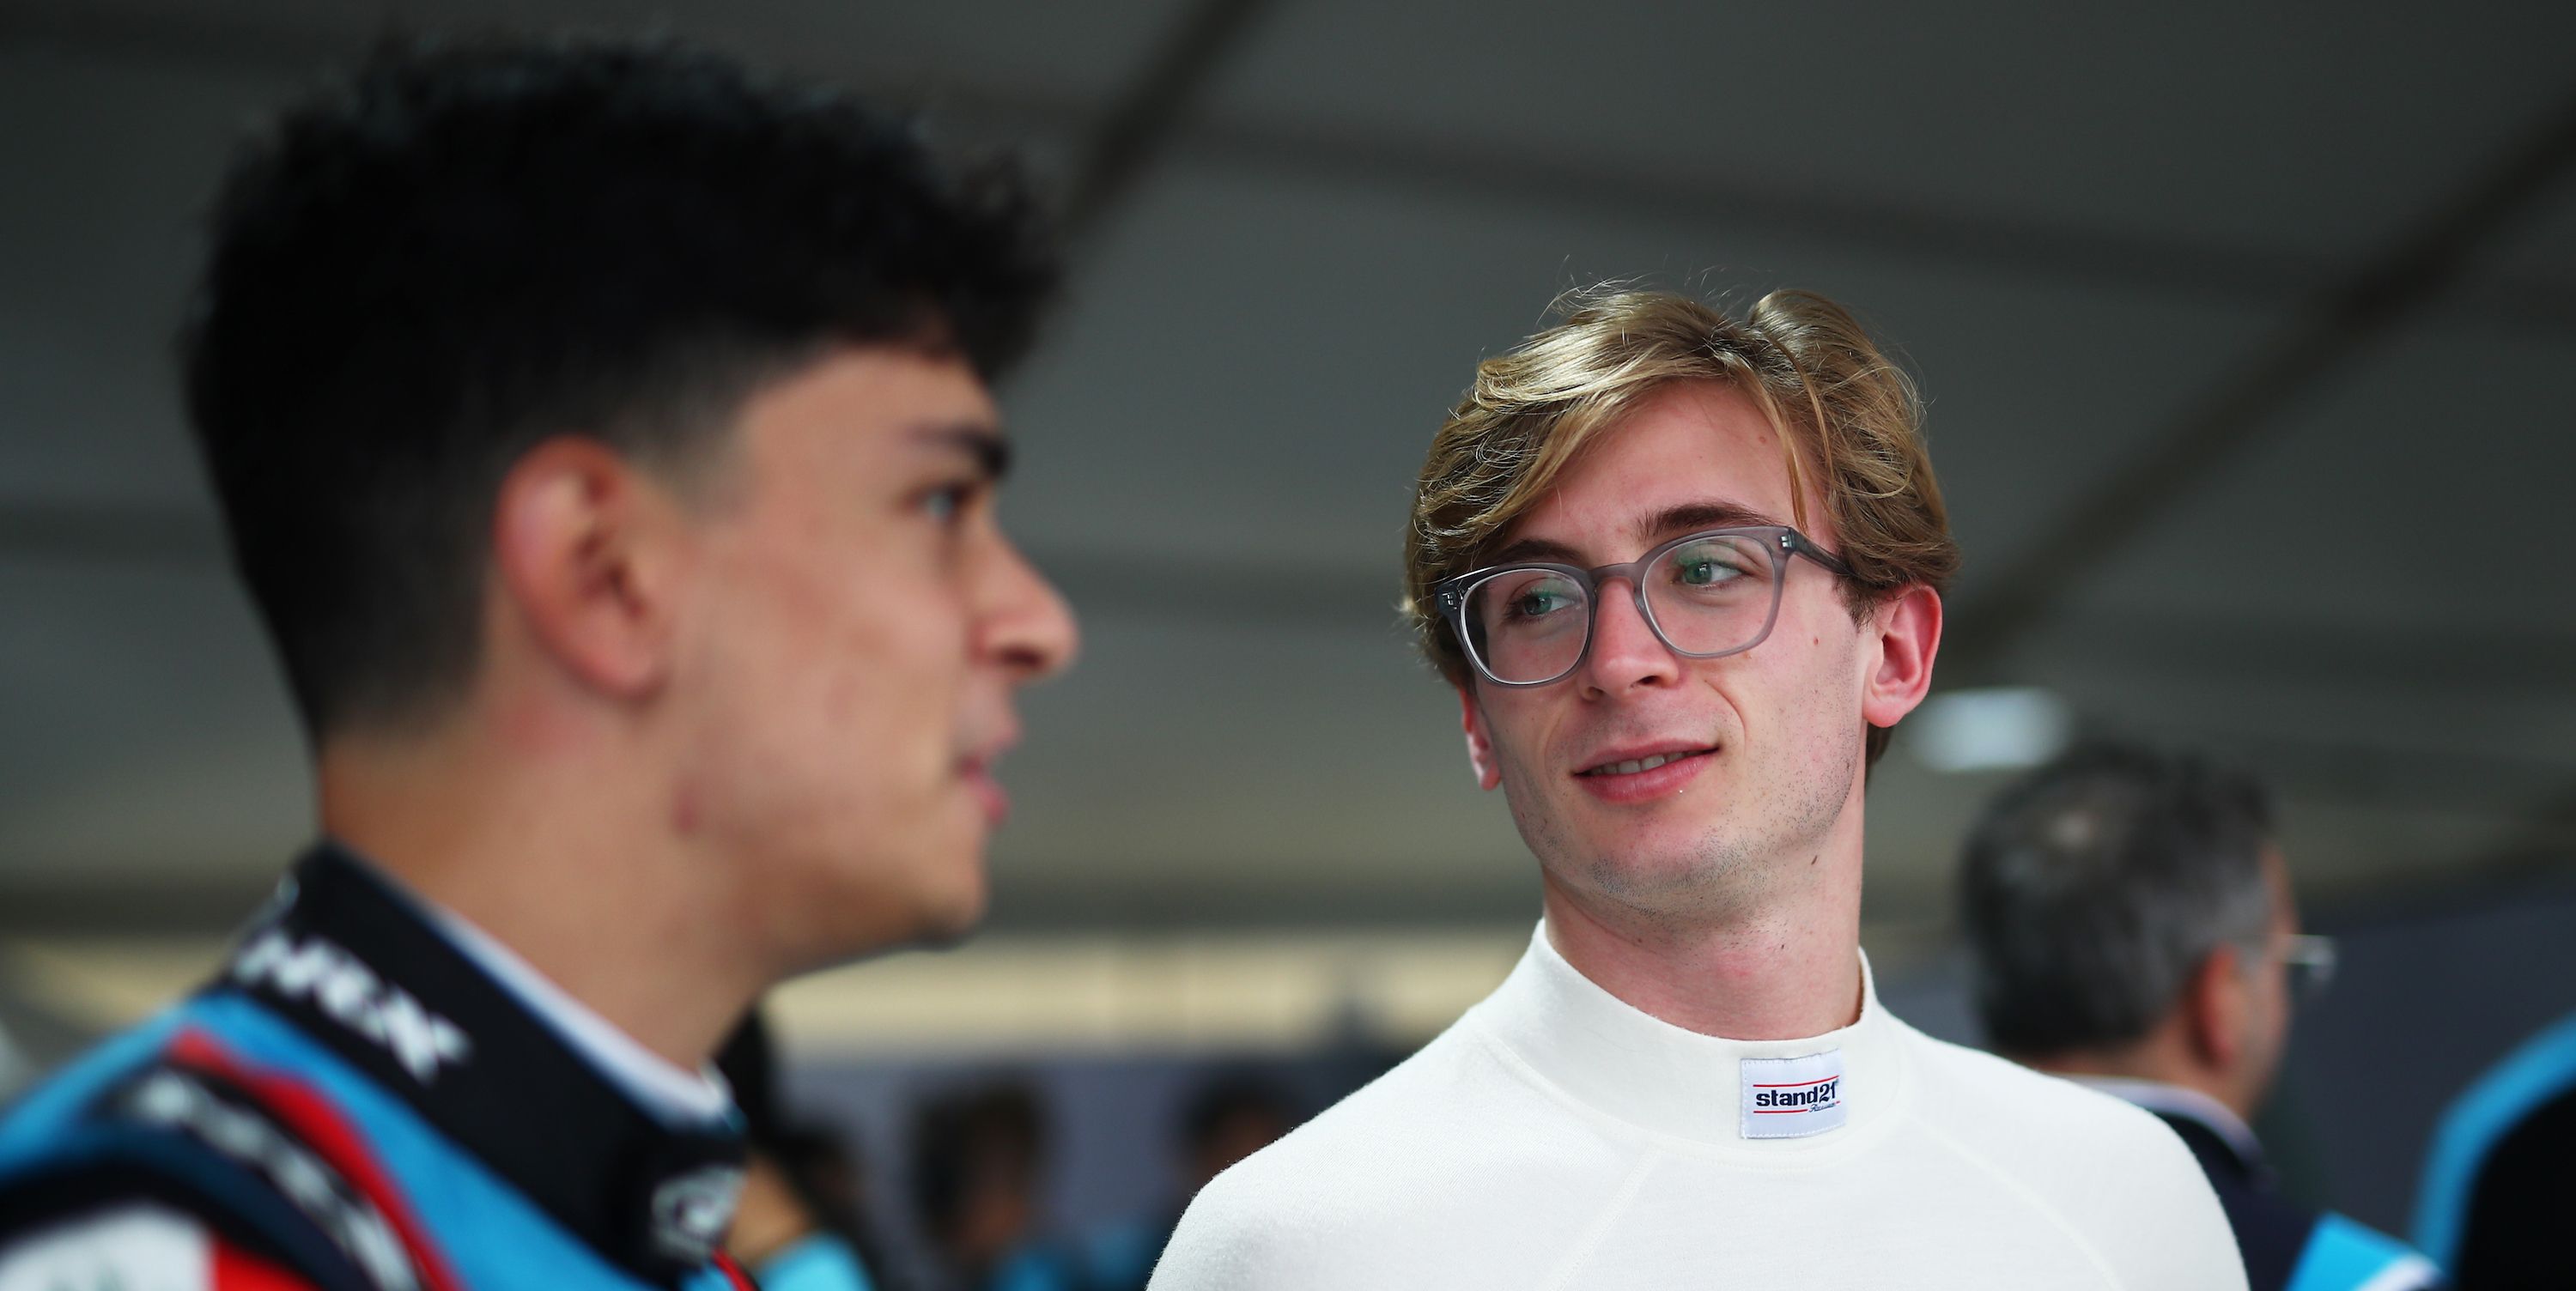 Can This American iRacing Phenom Make It to F1?